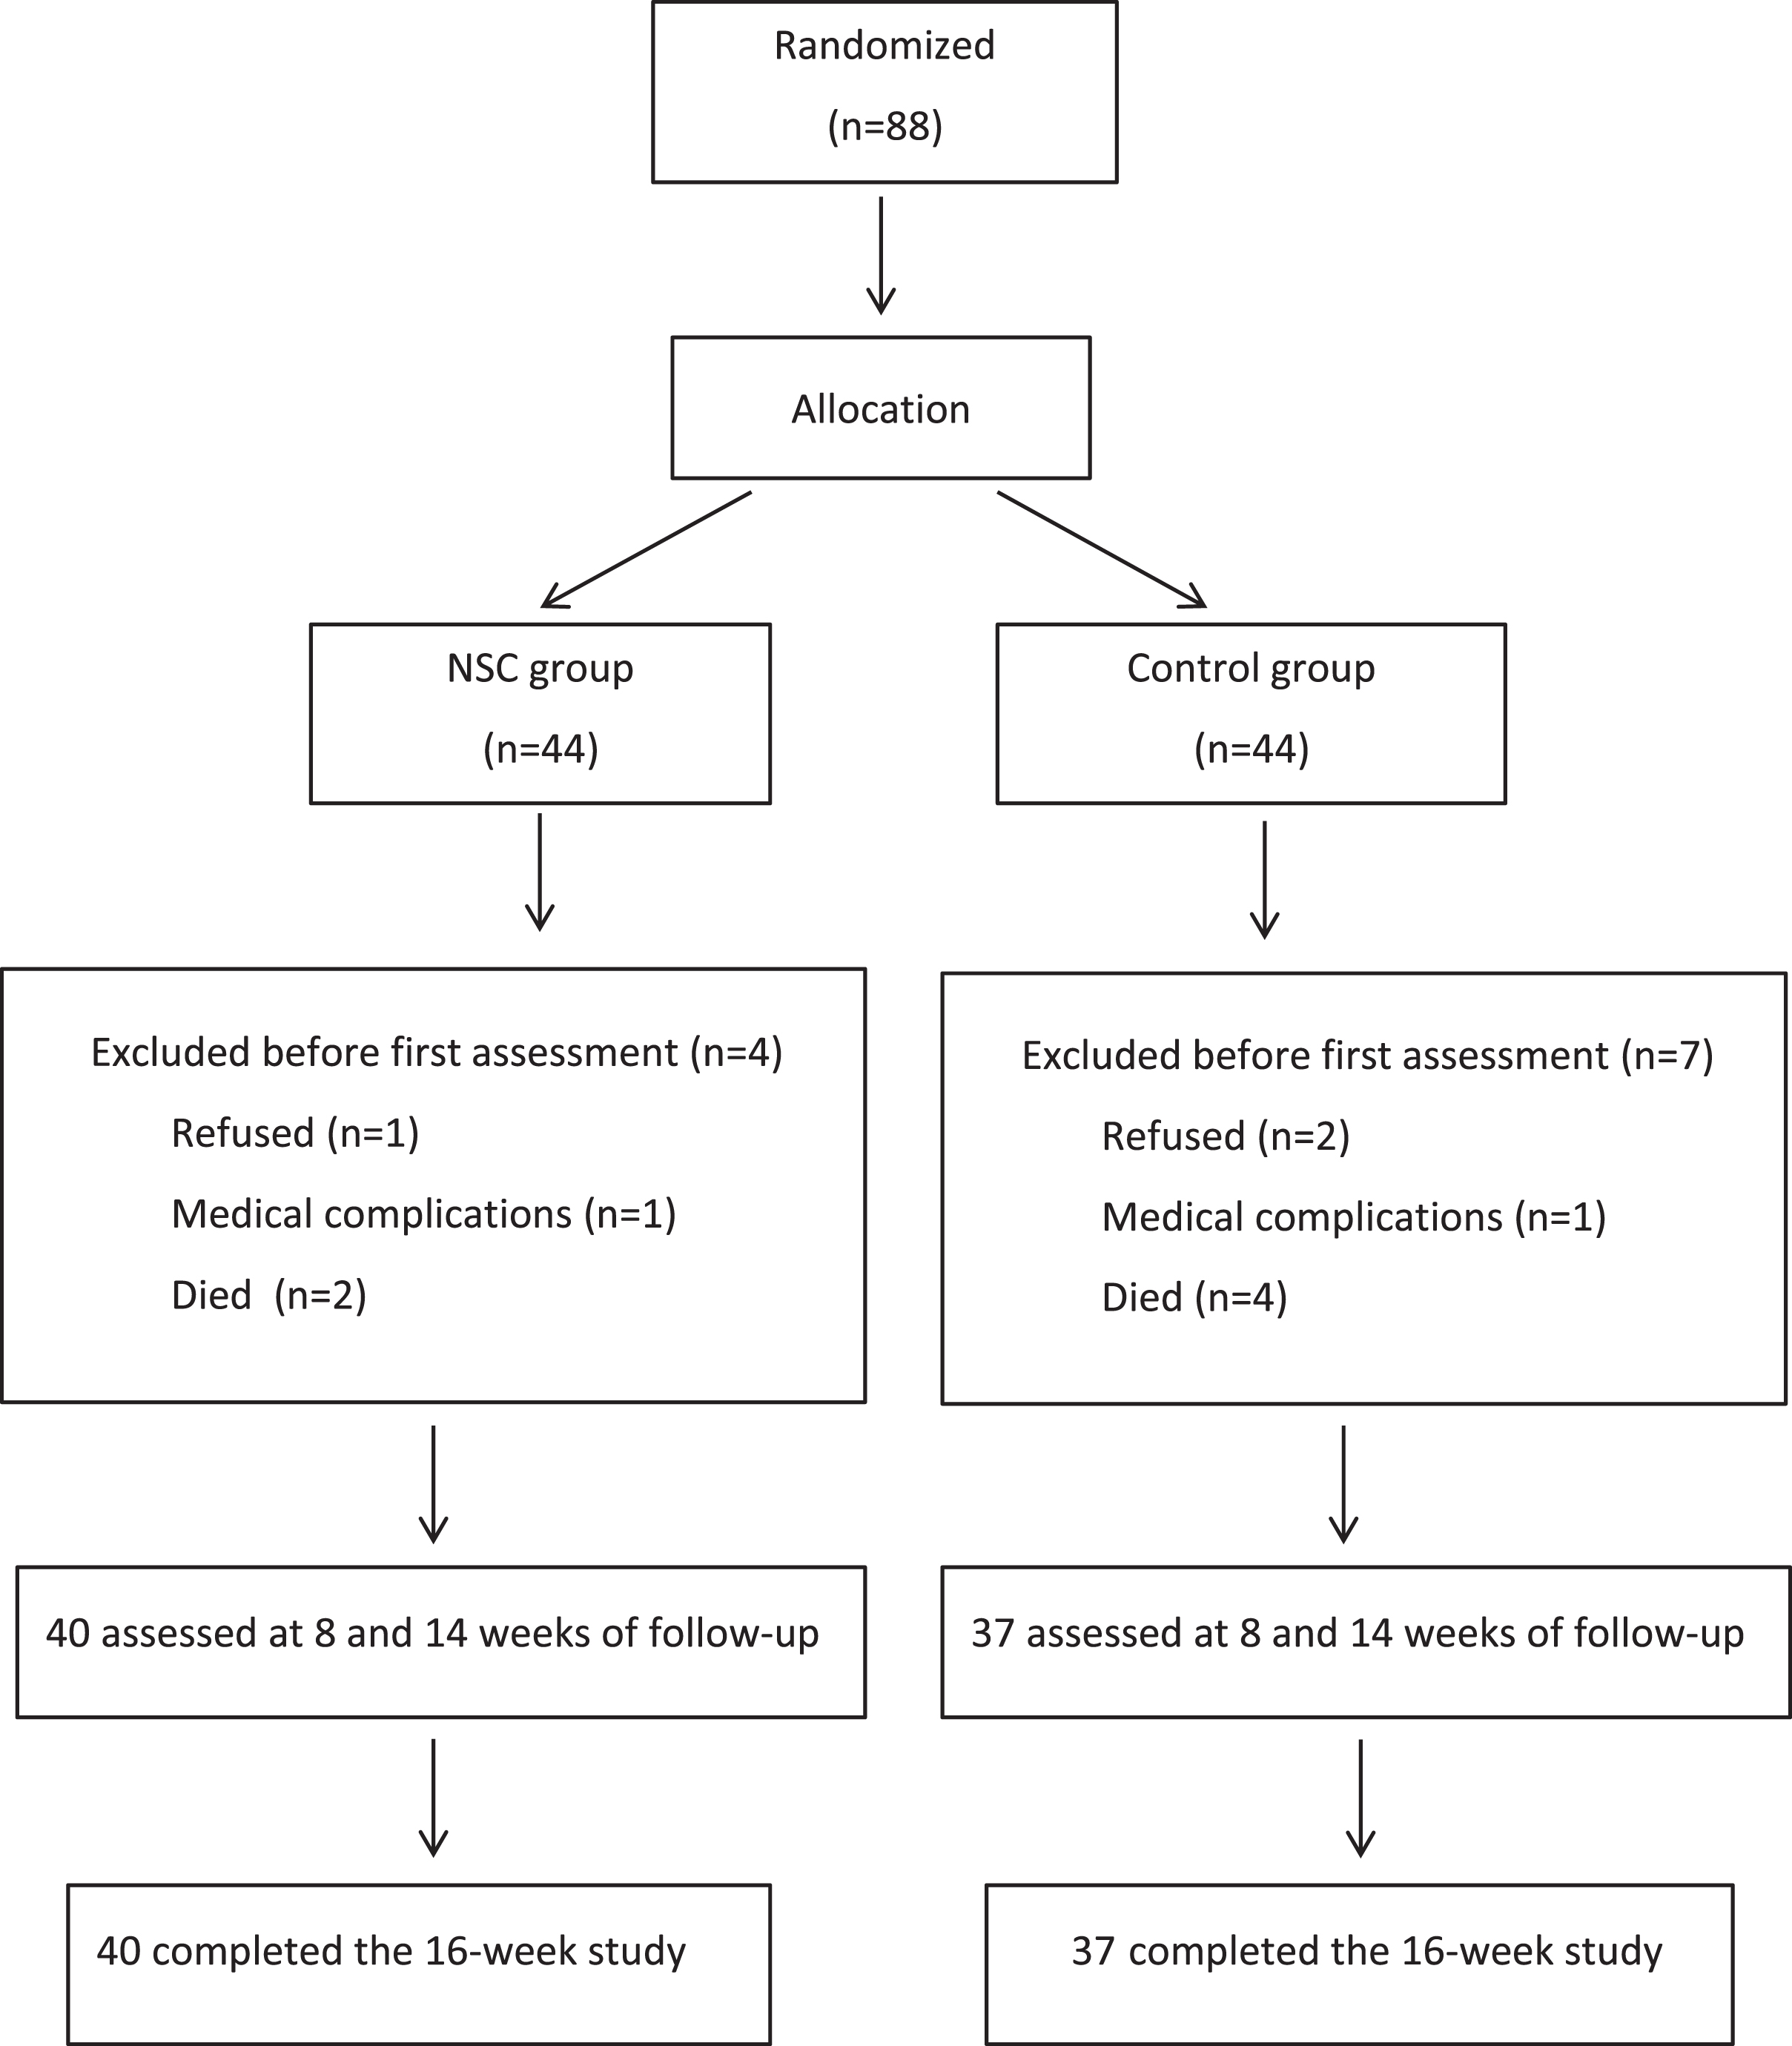 Flowchart of patients participating in the study.